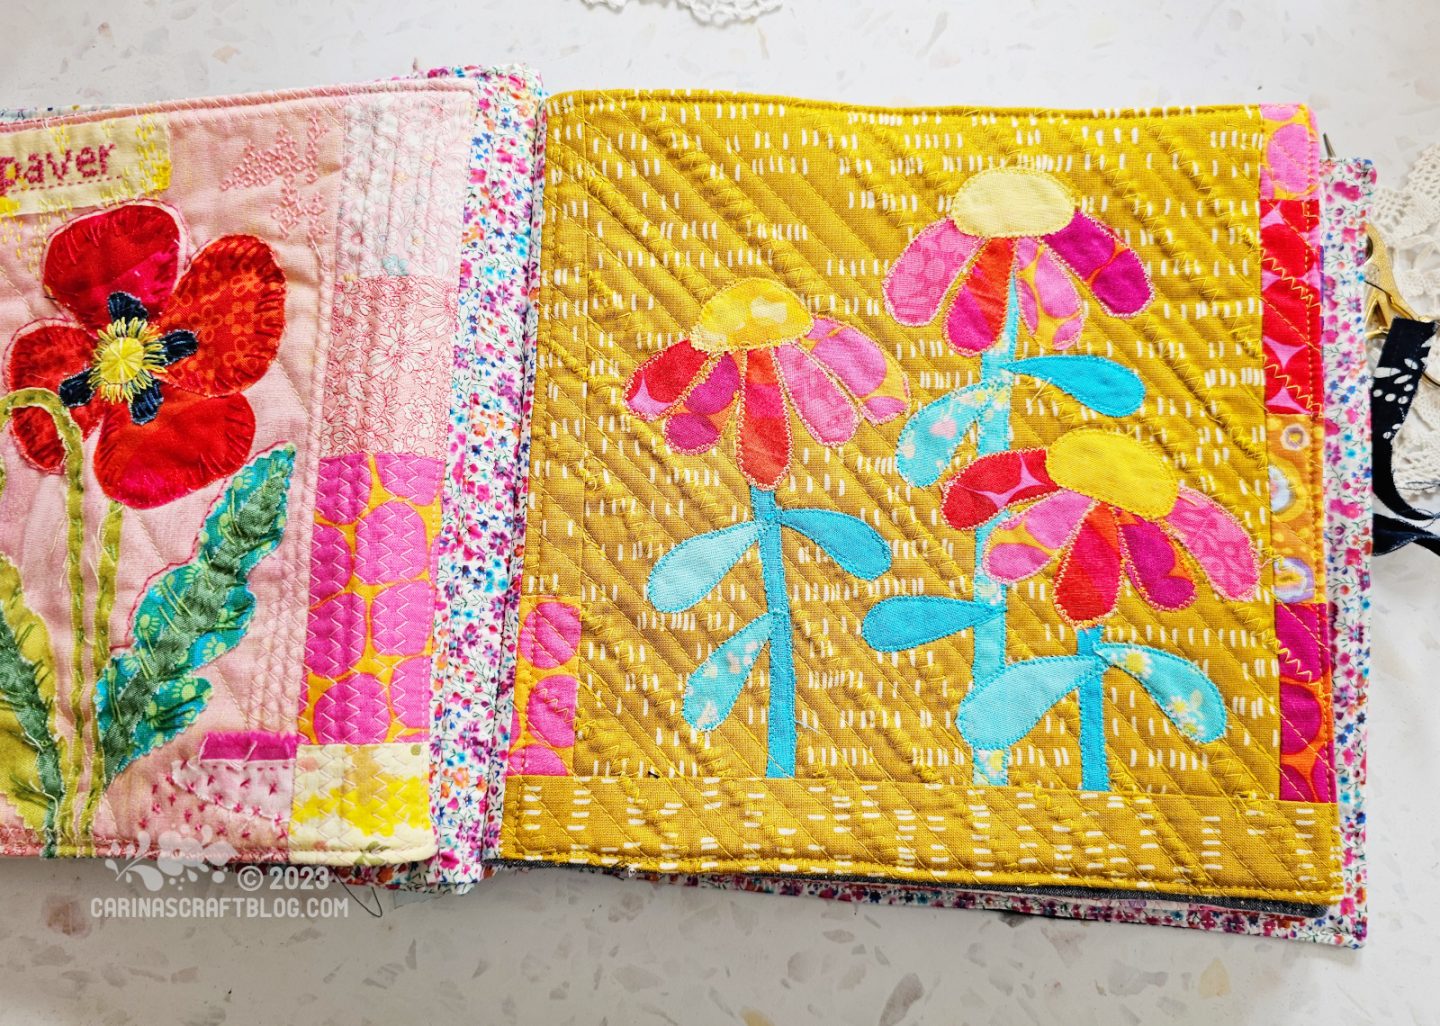 Overhead view of a spread in a textile book. Partial view of the left hand page shows a poppy on a pink background. The almost full view of the right hand page shows echinacea inspired flowers in yellow and pink with turquoise stems and leave, on a mustard yellow background.